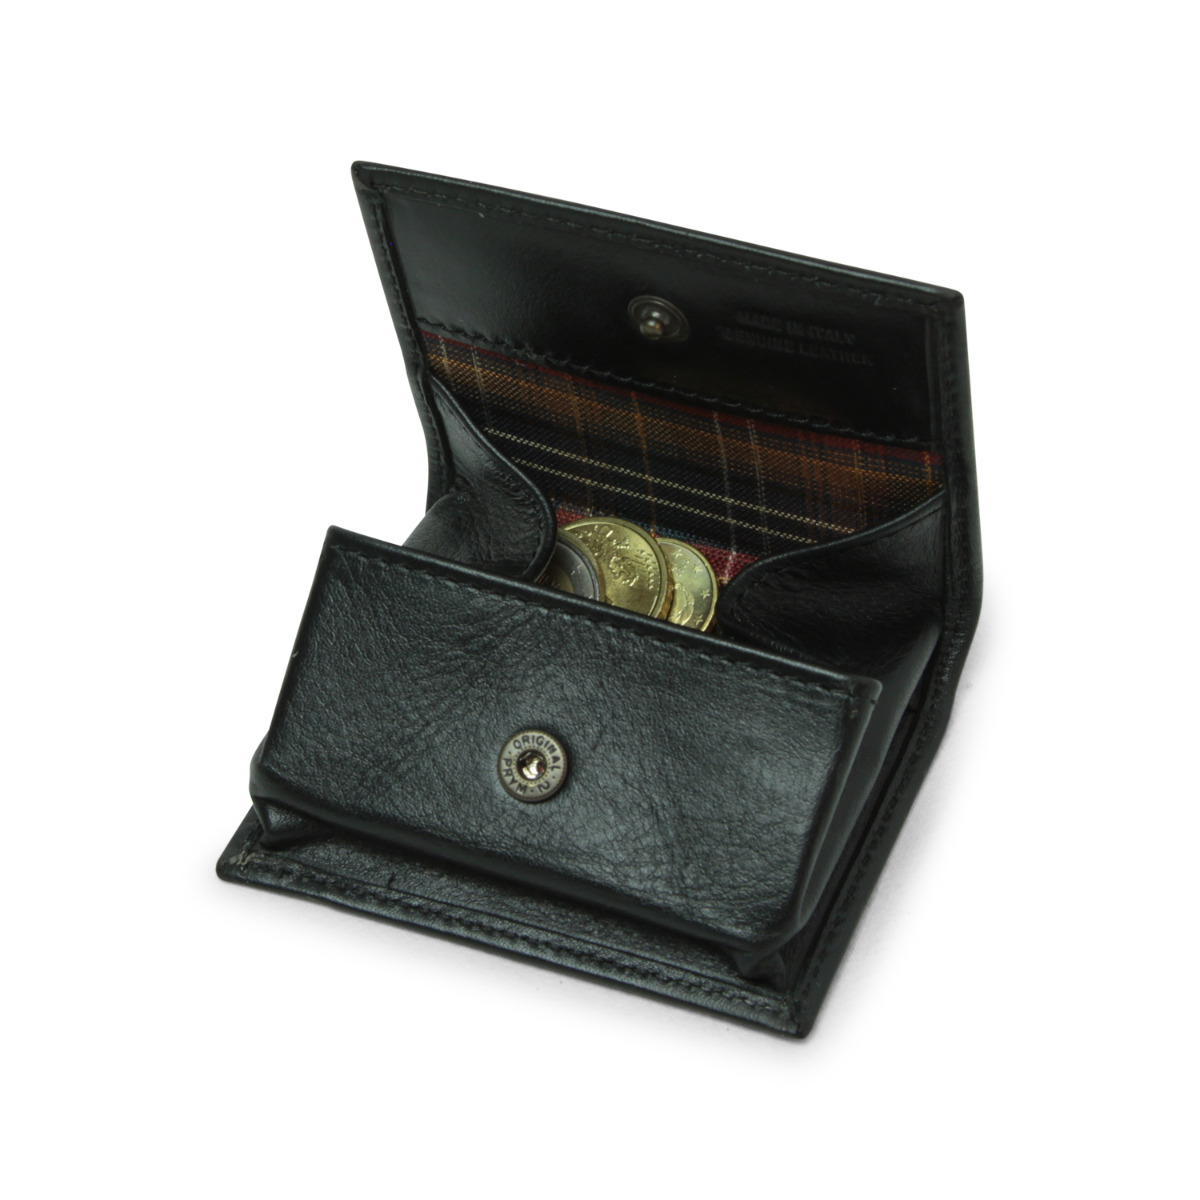 Leather Coin Purse - Brown | 806605MA US | Old Angler Firenze